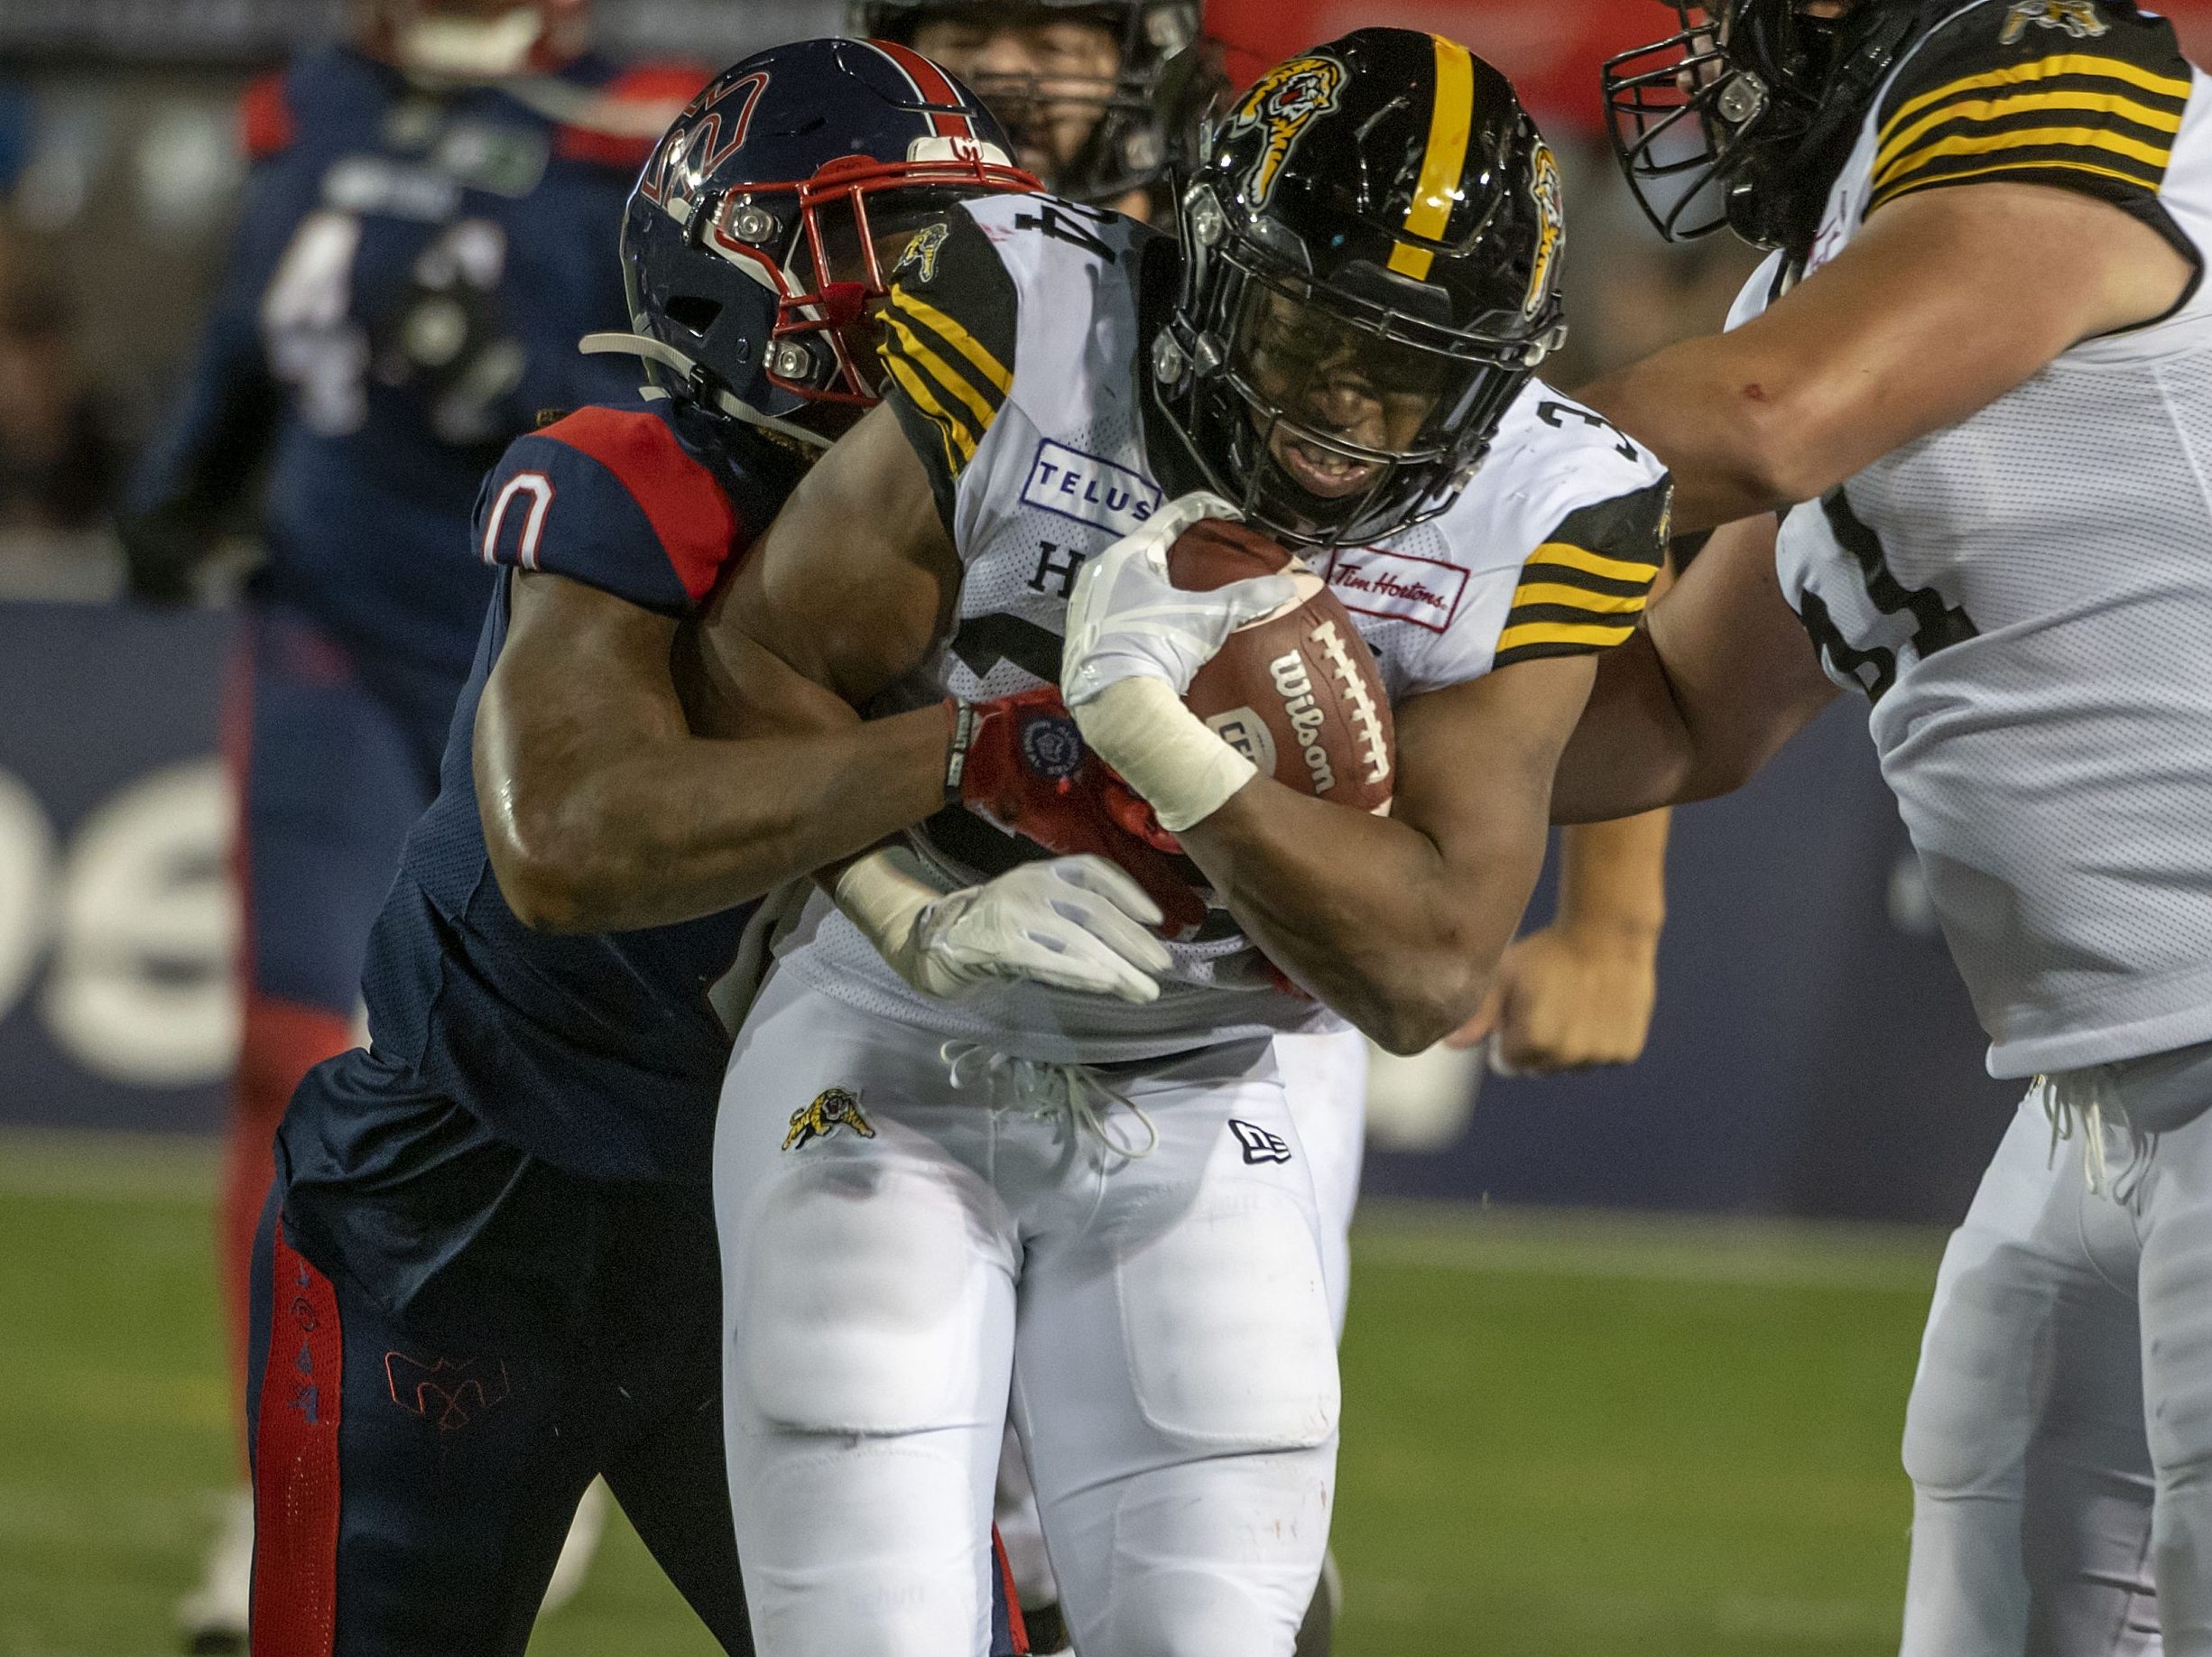 CFL East semifinal preview: Can the Alouettes overcome playoff